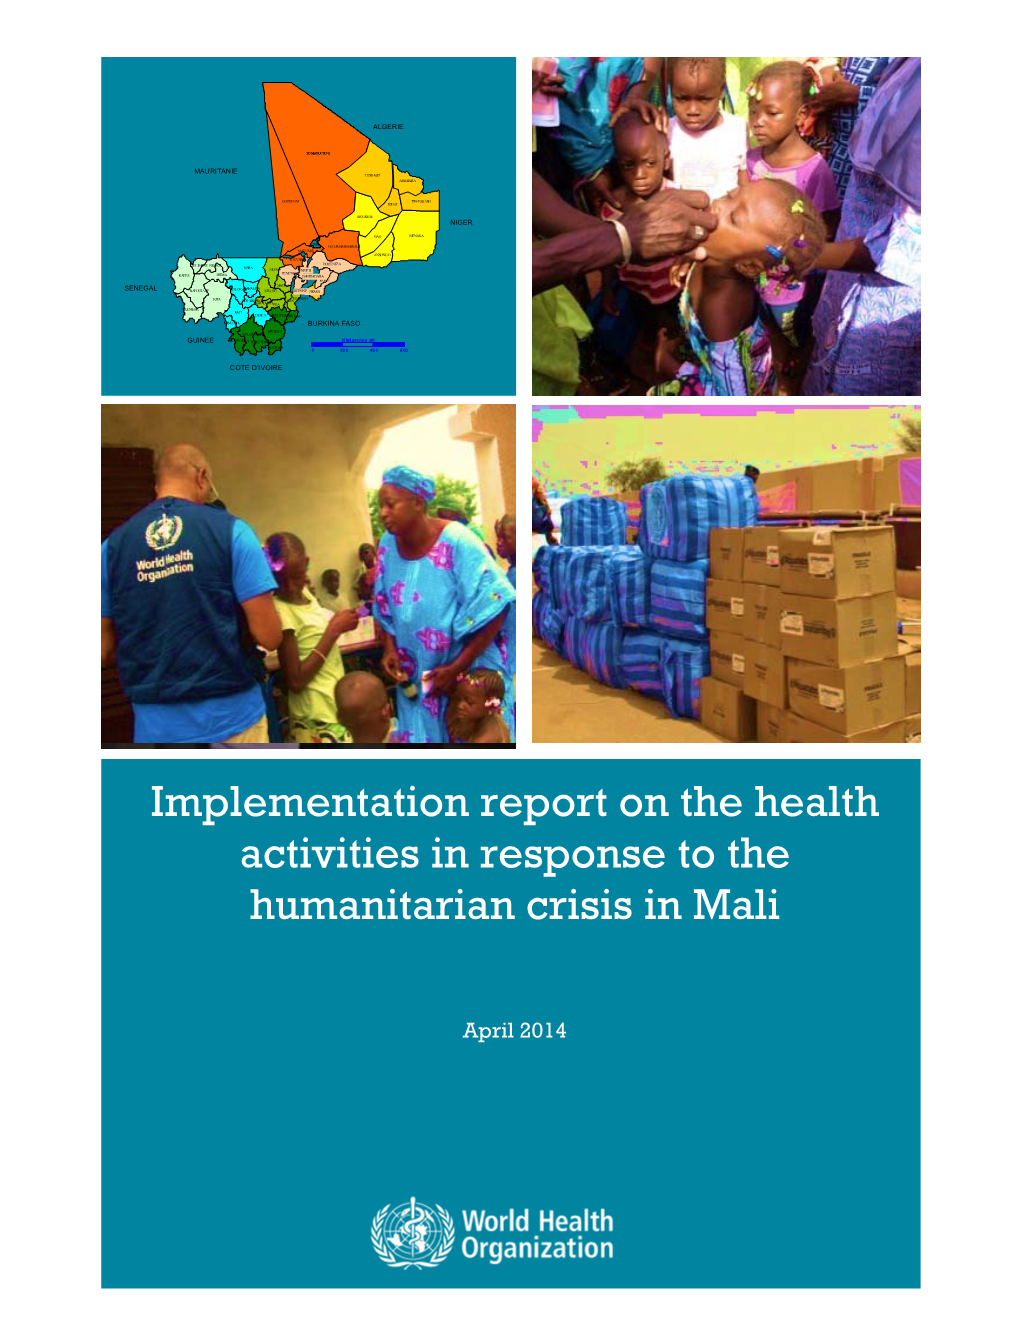 Implementation Report on the Health Activities in Response to the Humanitarian Crisis in Mali